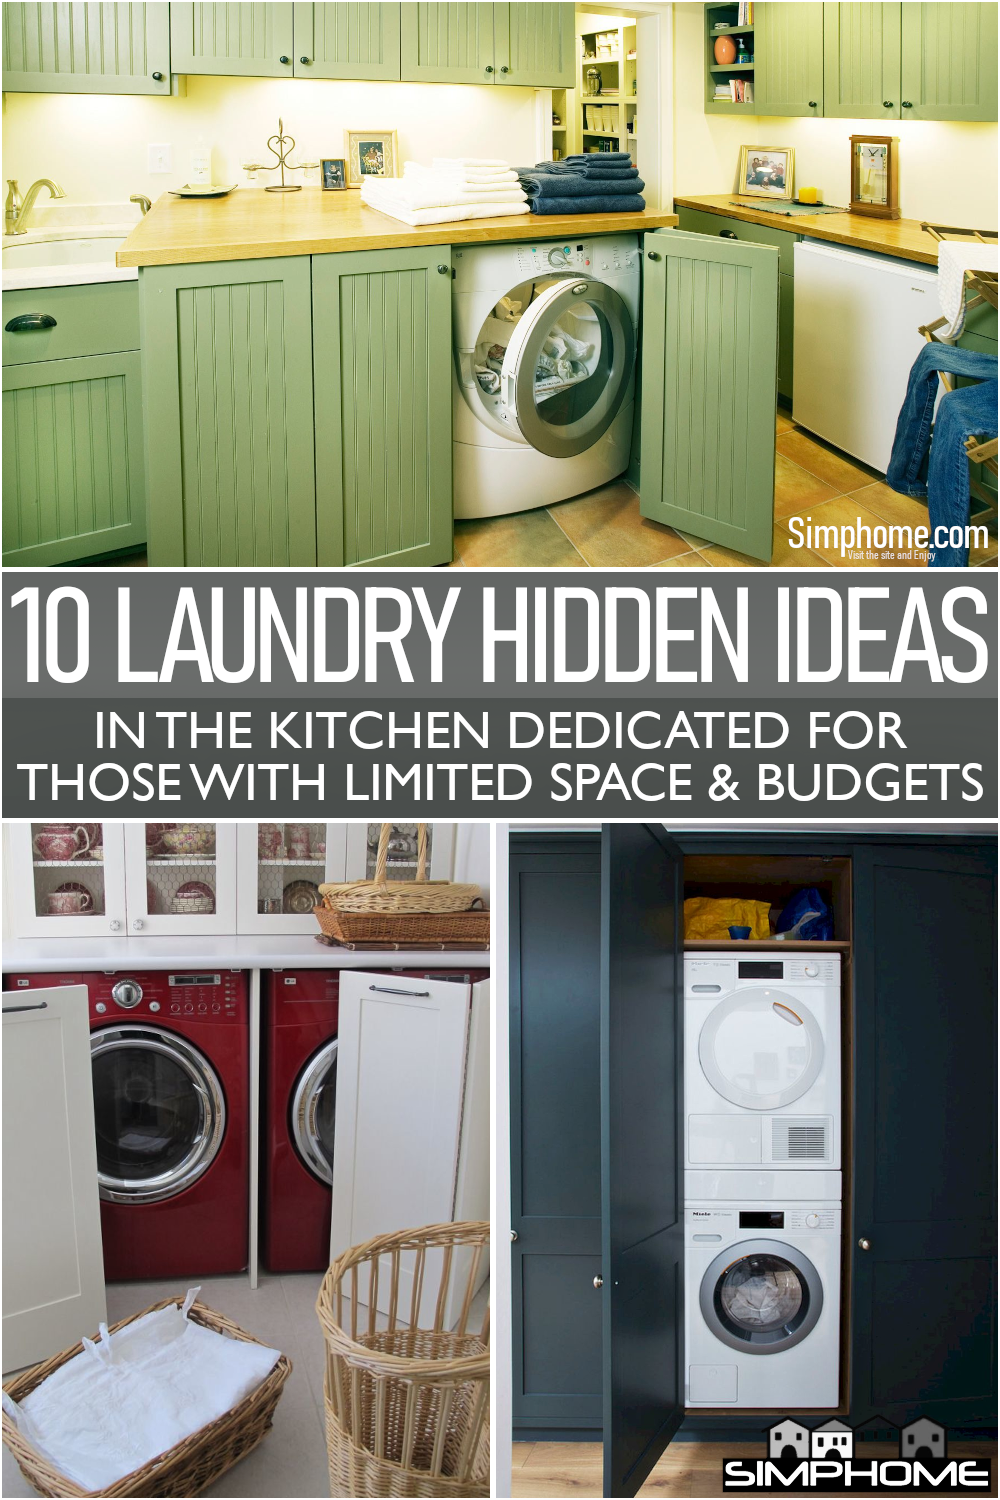 Awesome 10 Laundry Hidden in Kitchen Ideas